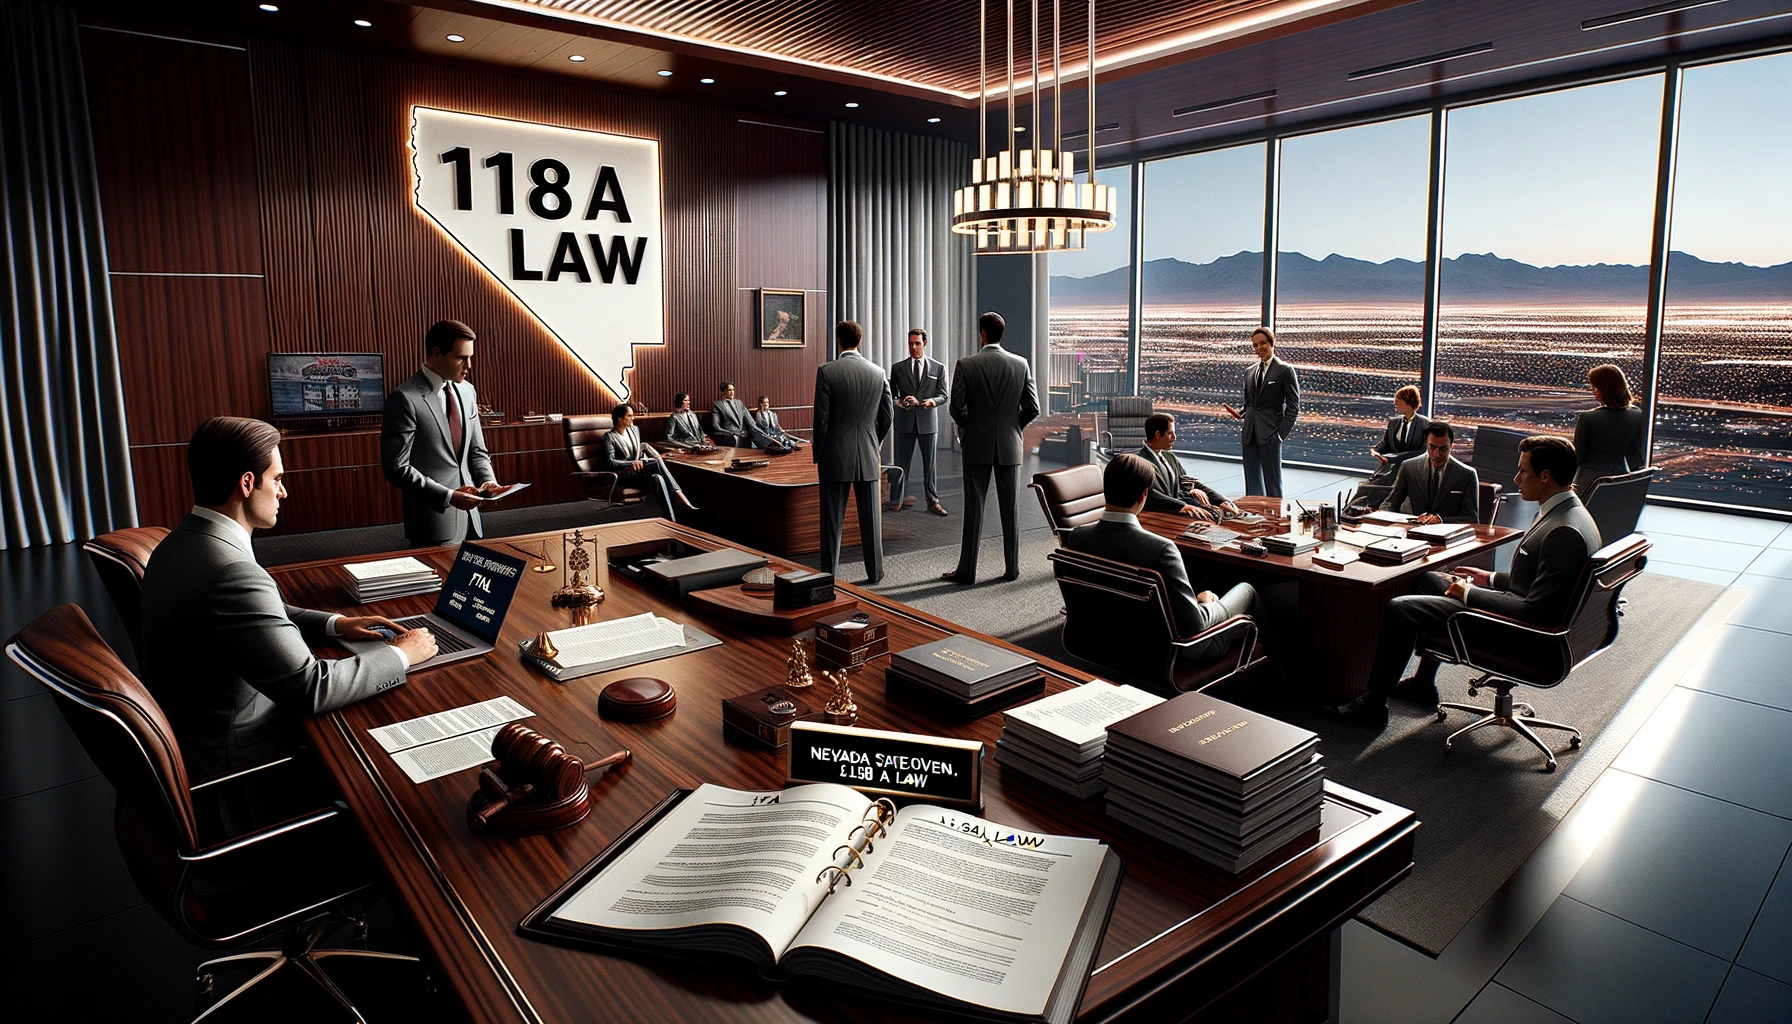 Sophisticated legal office with sharply-dressed lawyers discussing Nevada's 118A Law, with Las Vegas cityscape in the background